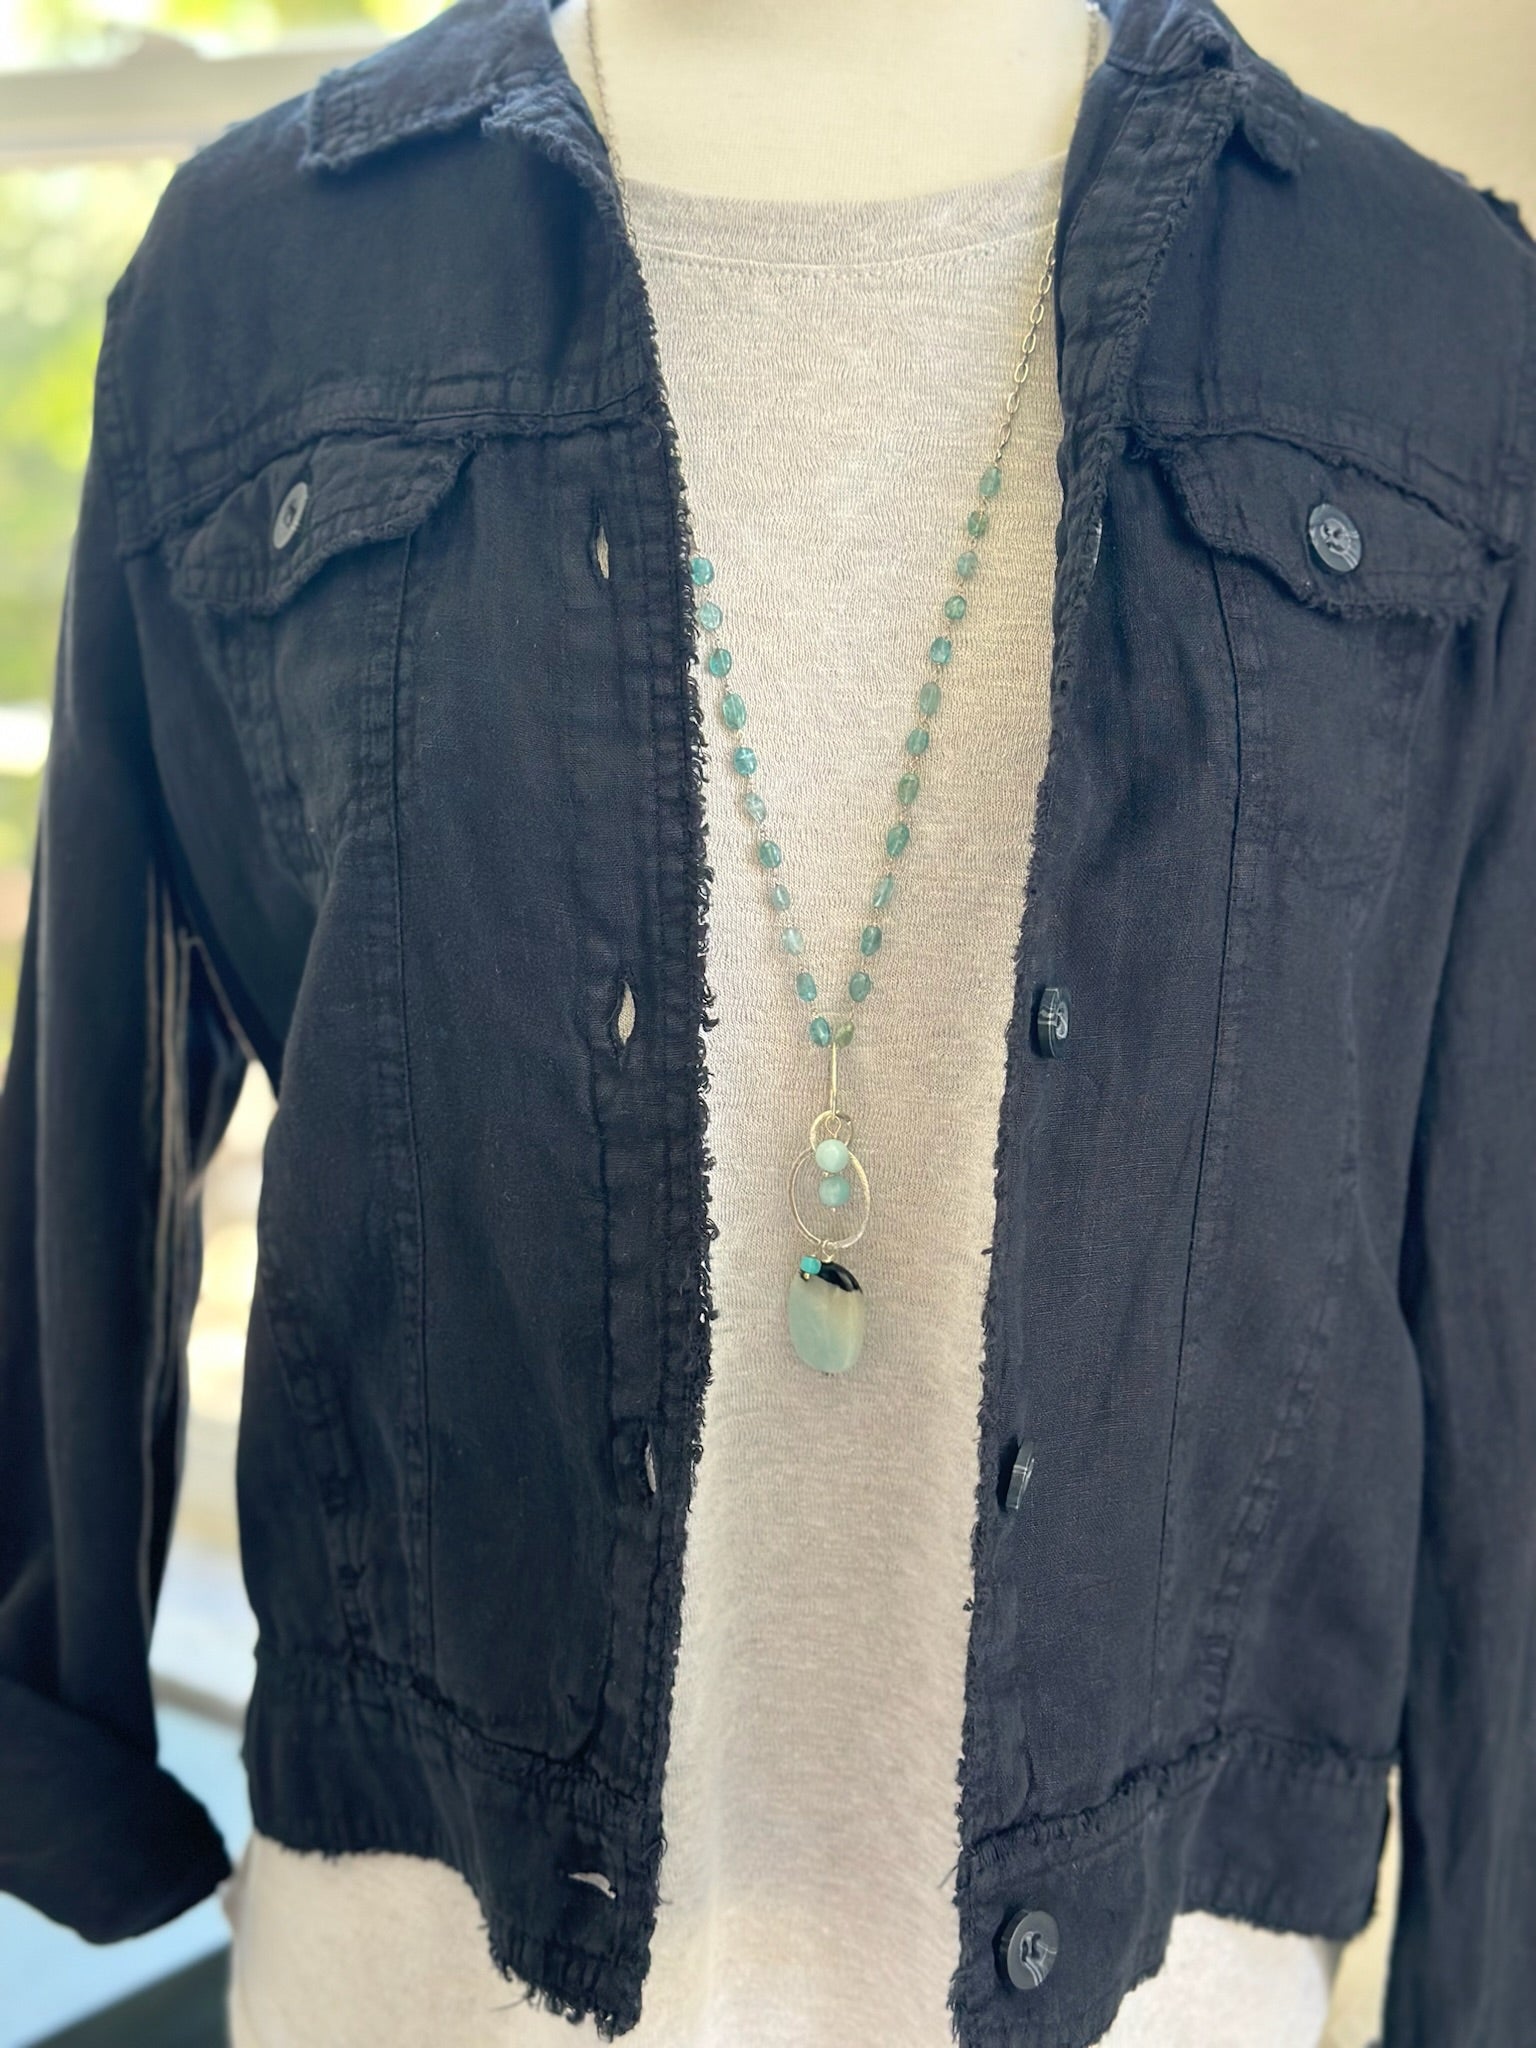 trina top styled with linen jacket and handmade necklace